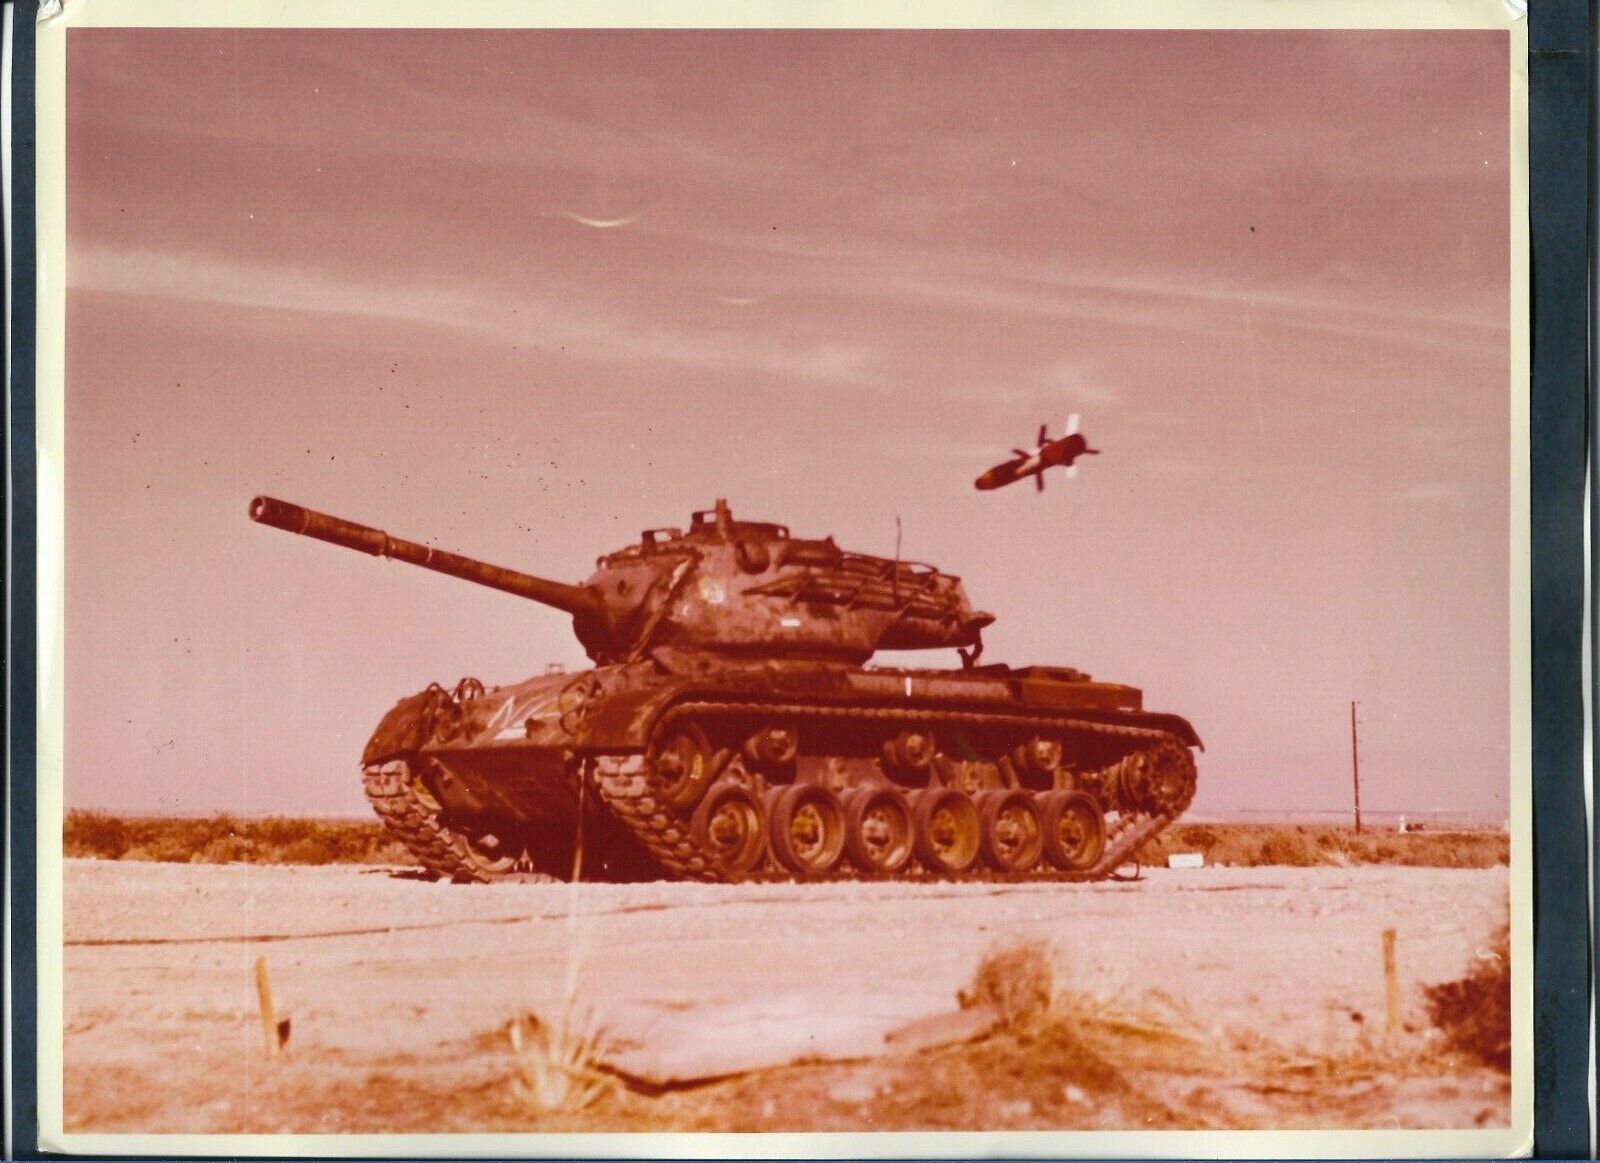 M712 COPPERHEAD CANNON-LAUNCHED GUIDED PROJECTILE  ABOUT TO HIT 1970s Photo Y 83